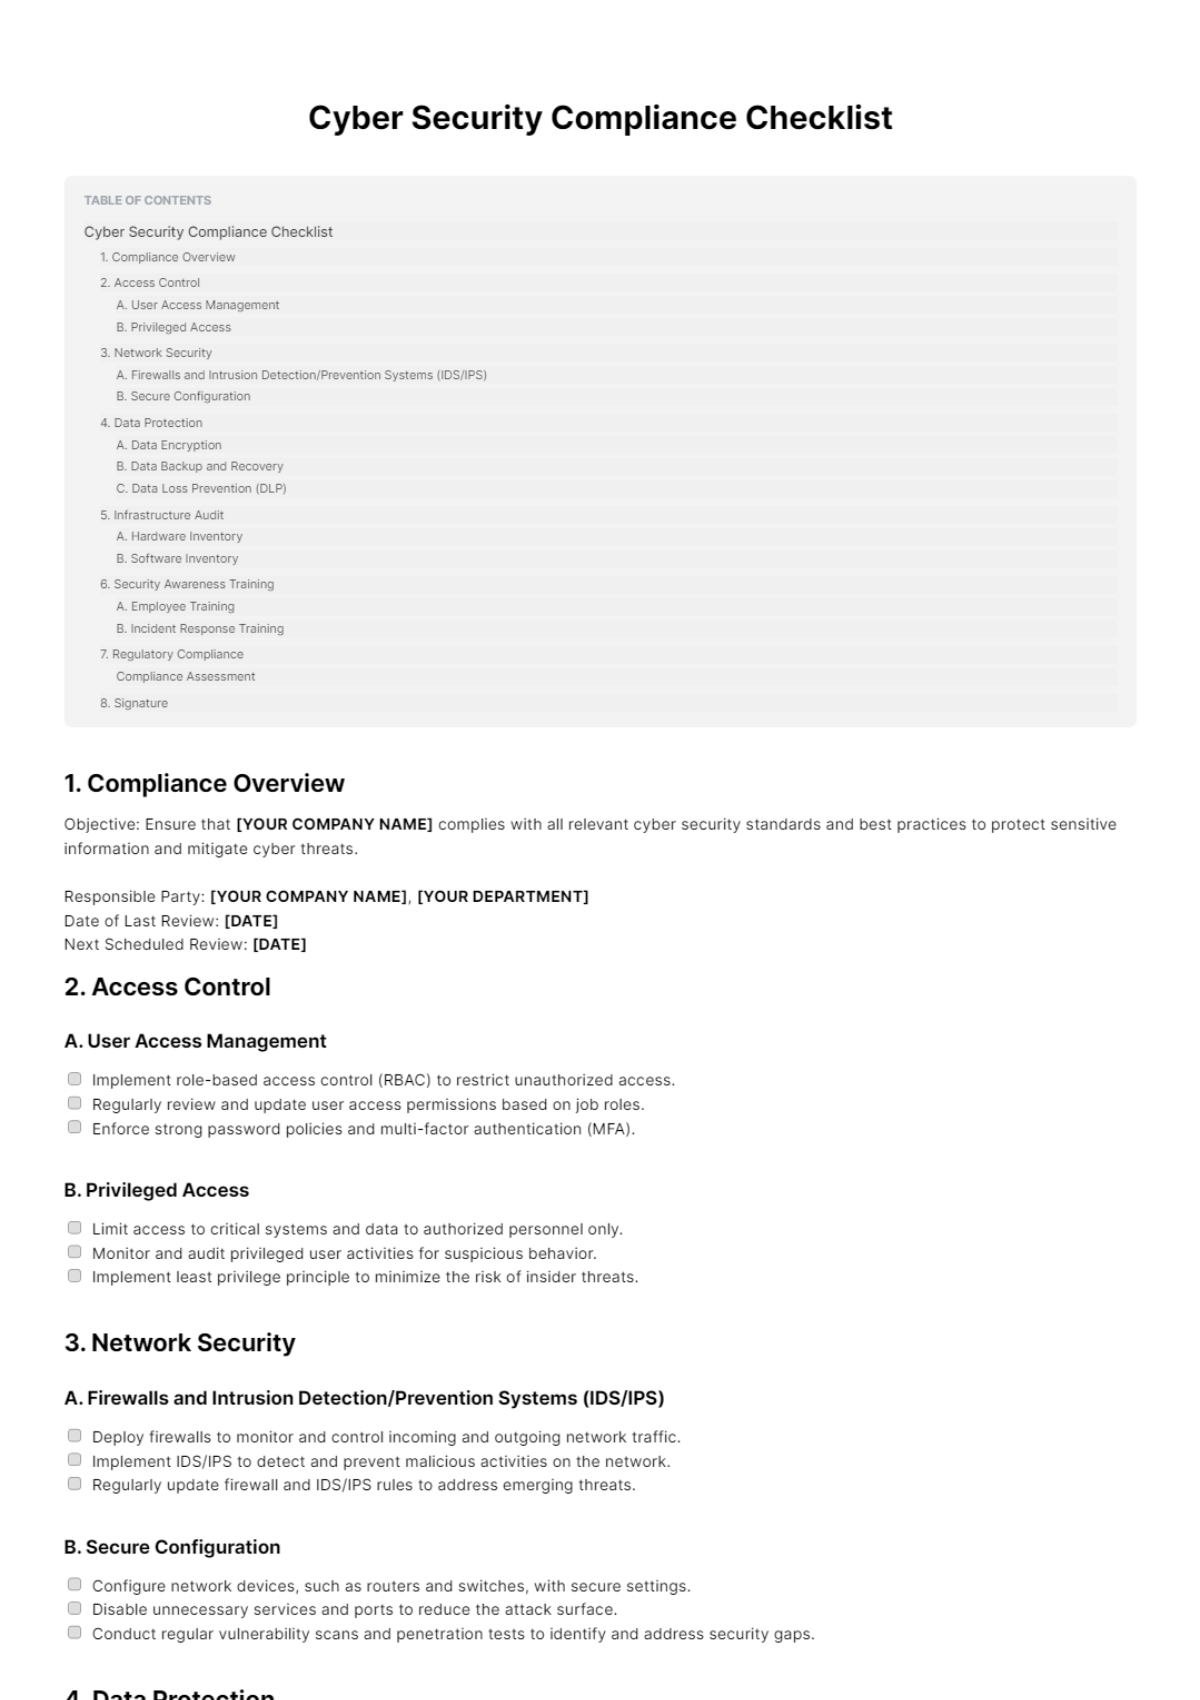 Free Cyber Security Compliance Checklist Template